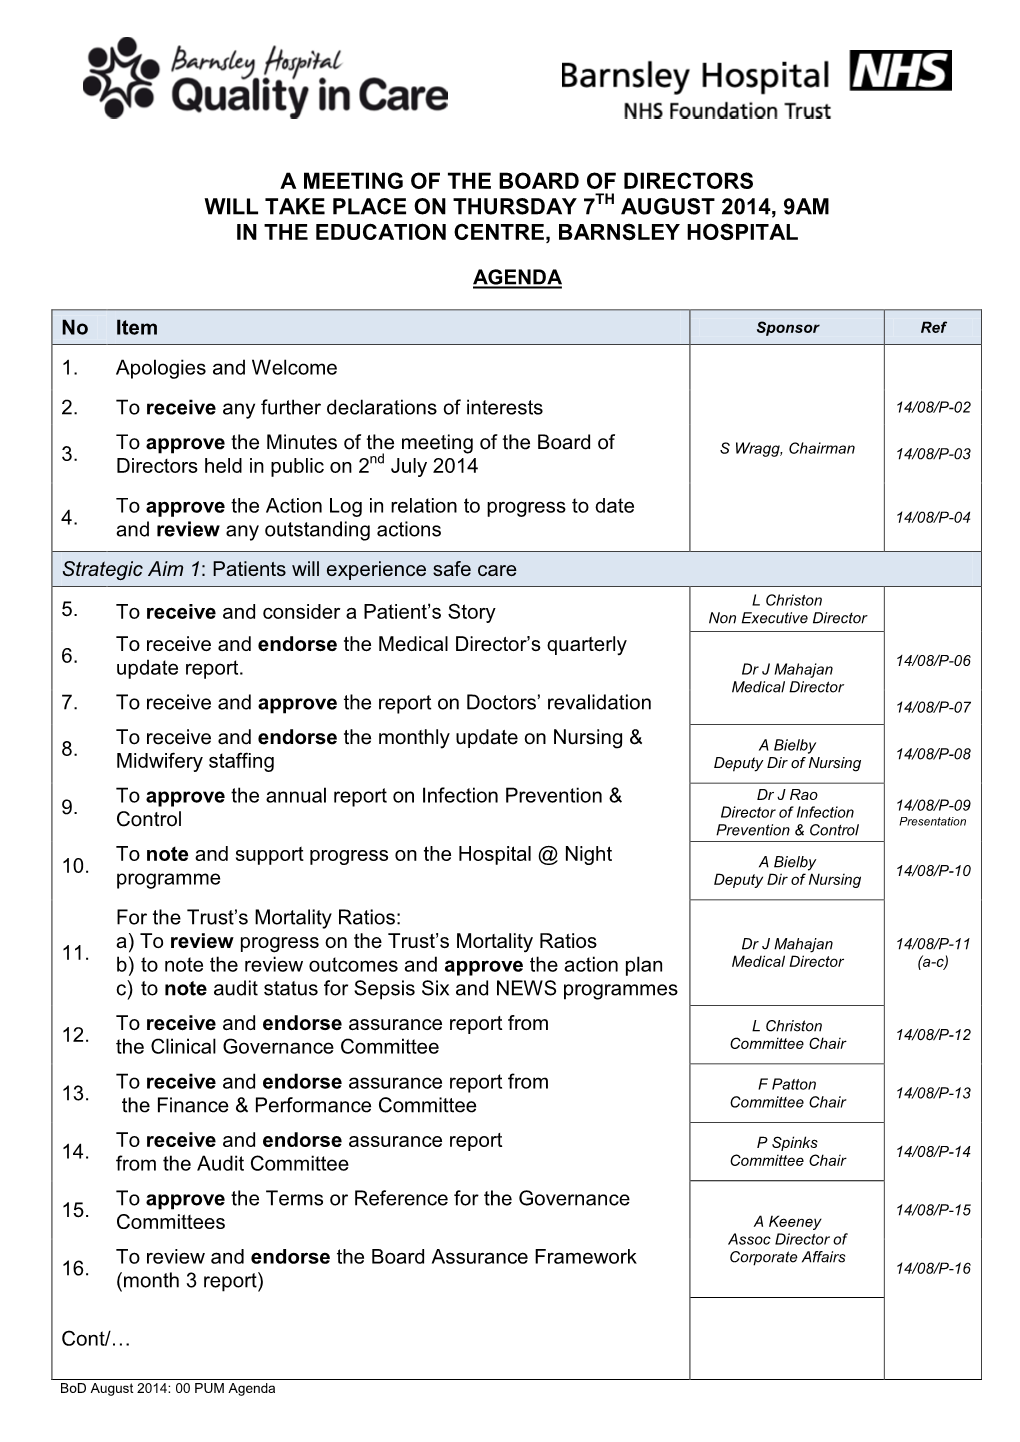 A Meeting of the Board of Directors Will Take Place on Thursday 7Th August 2014, 9Am in the Education Centre, Barnsley Hospital